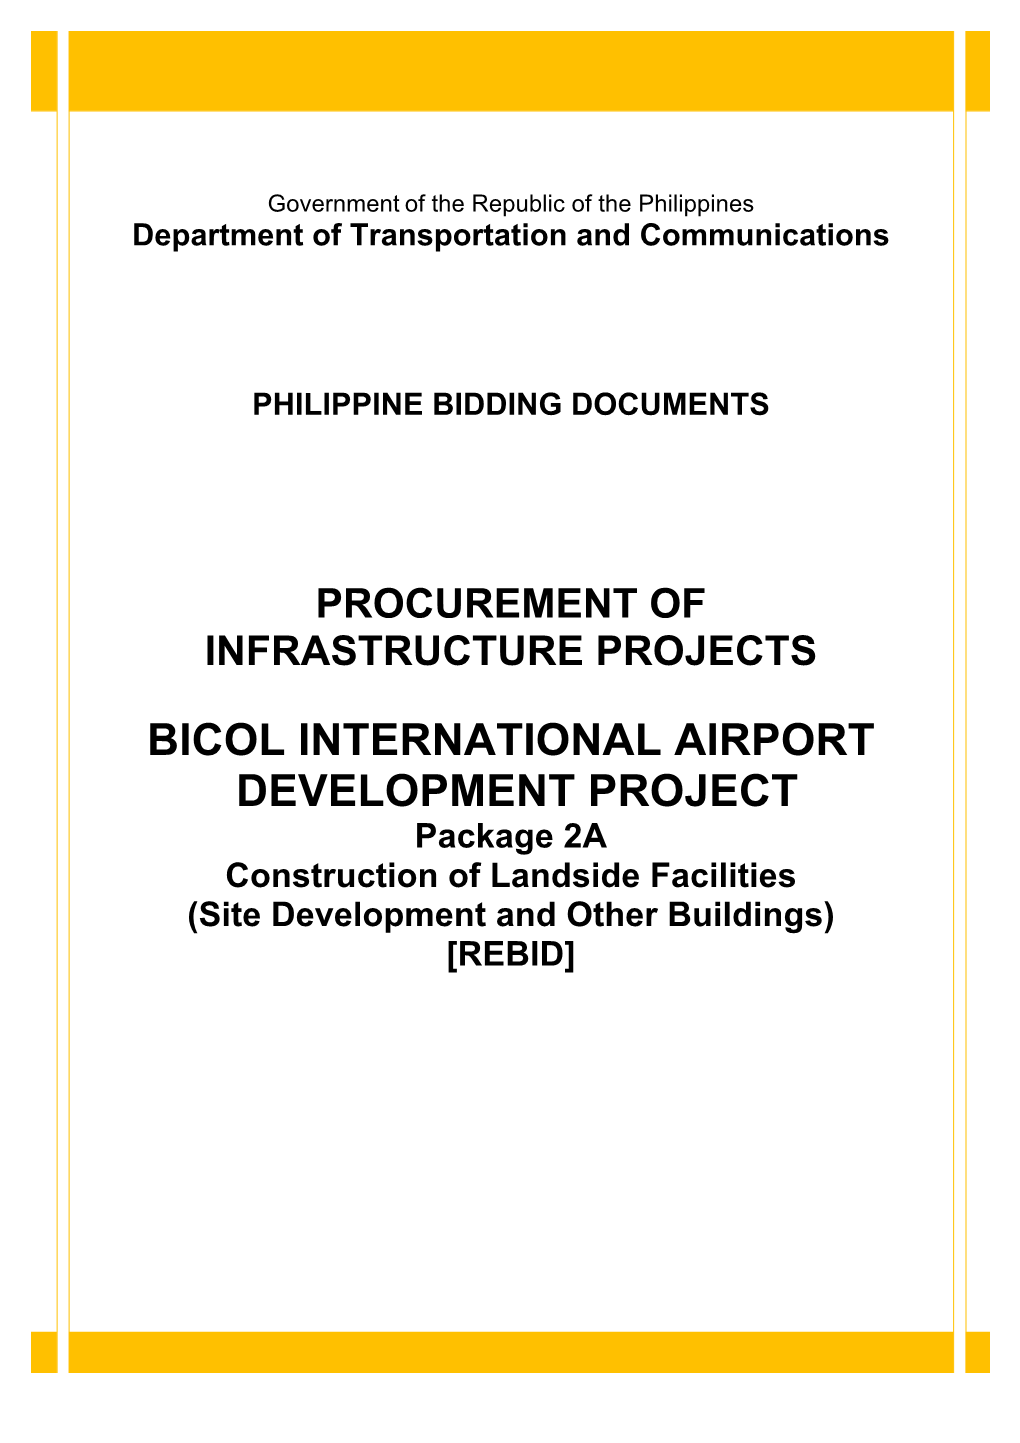 BICOL)INTERNATIONAL)AIRPORT) )DEVELOPMENT)PROJECT) Package)2A! Construction)Of)Landside)Facilities) (Site)Development)And)Other)Buildings)) [REBID]! ! ) ) ) ) ) )